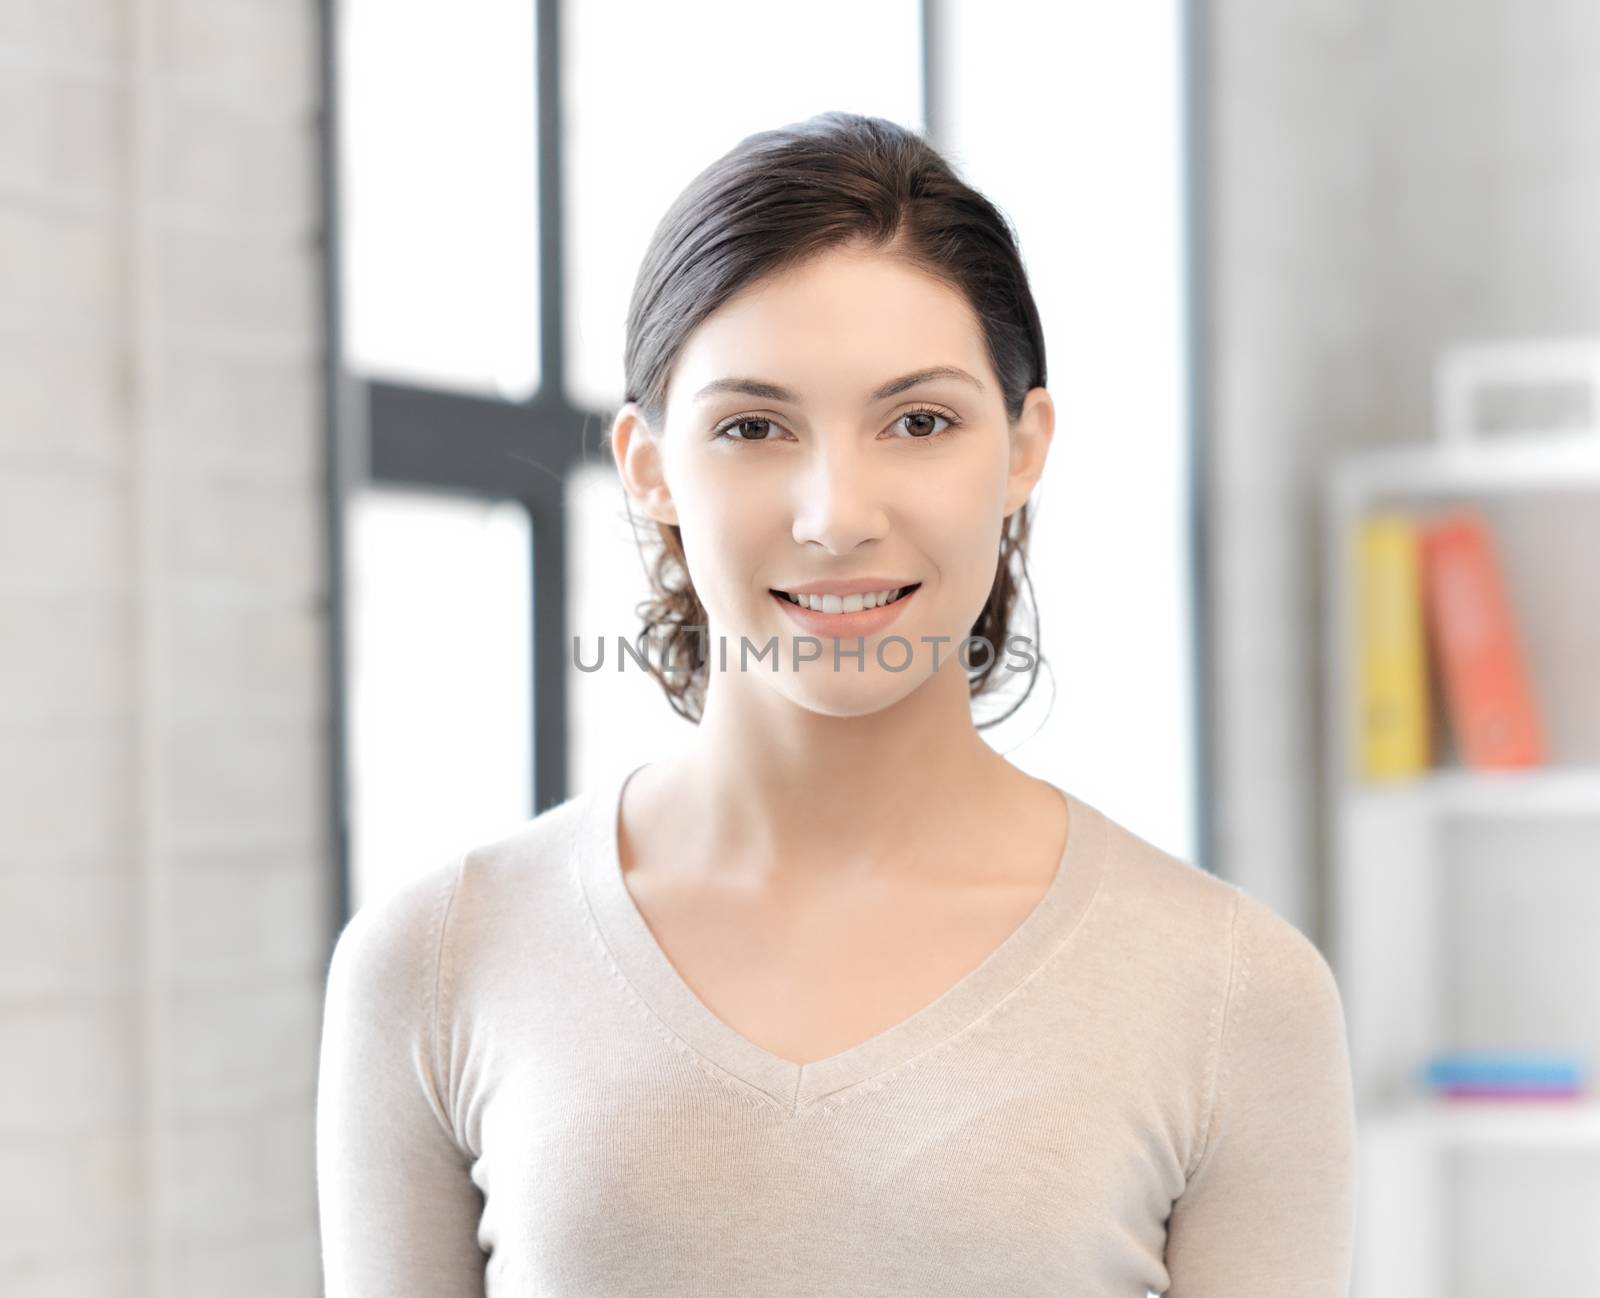 business and education concept - happy and smiling woman